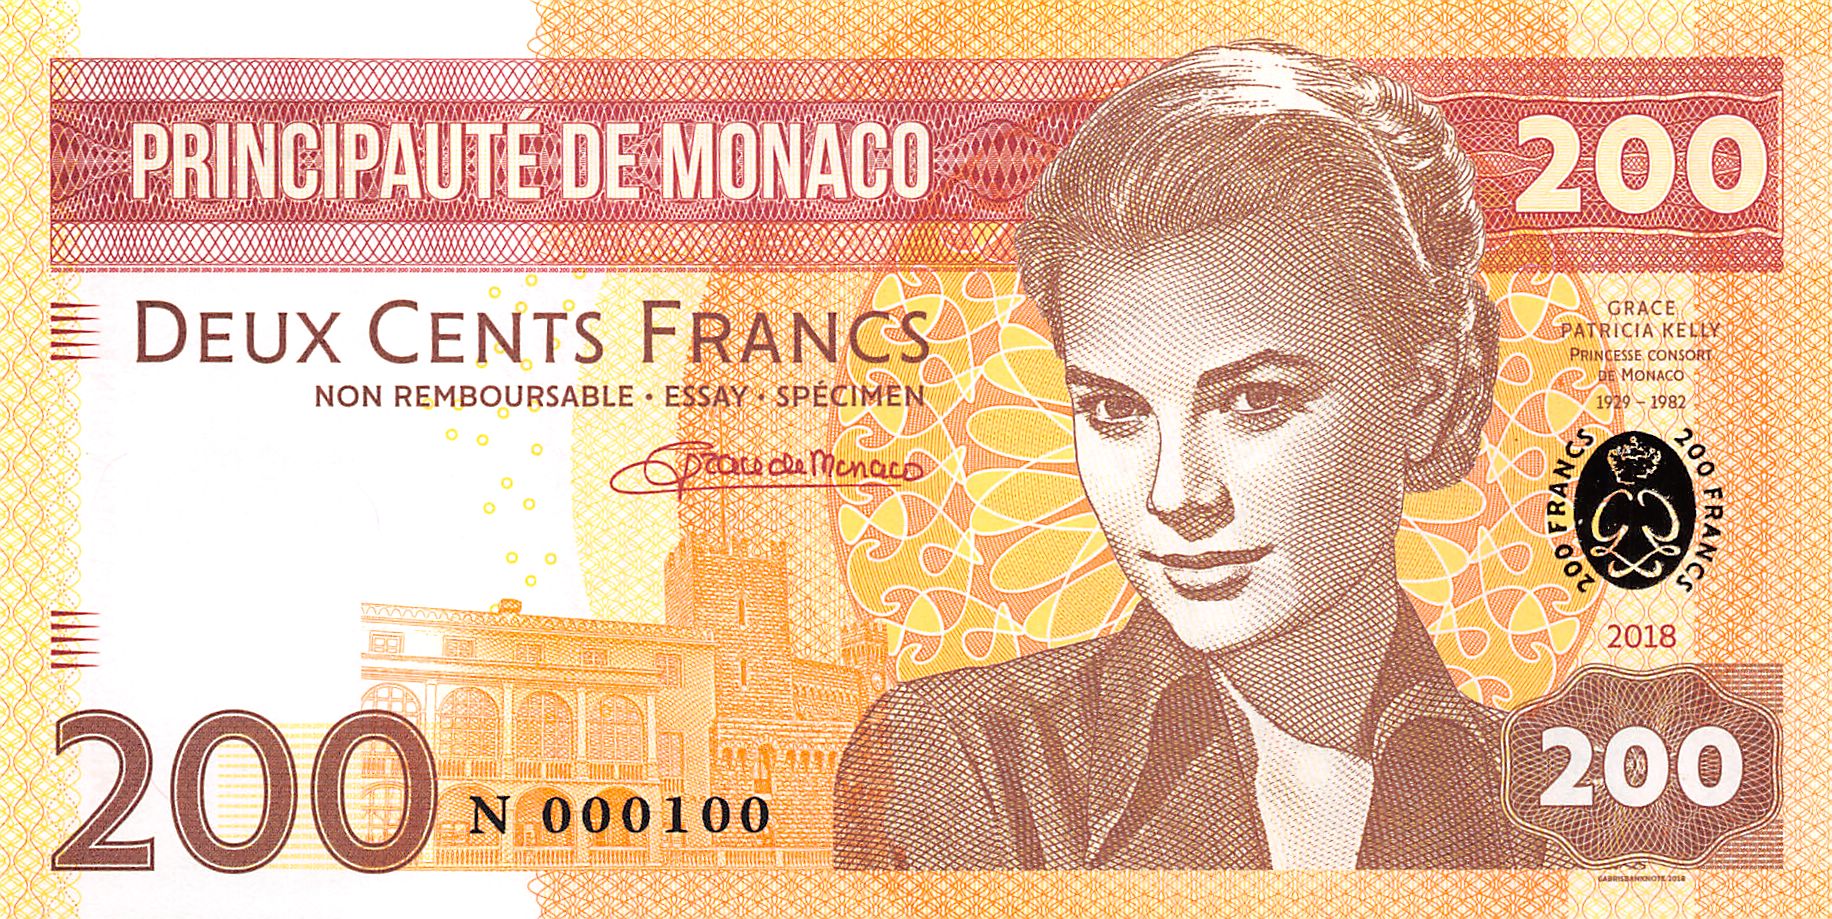 MONACO 20 Francs Fun-Fantasy Note Private Issue Currency 2018 Grace Kelly Bill